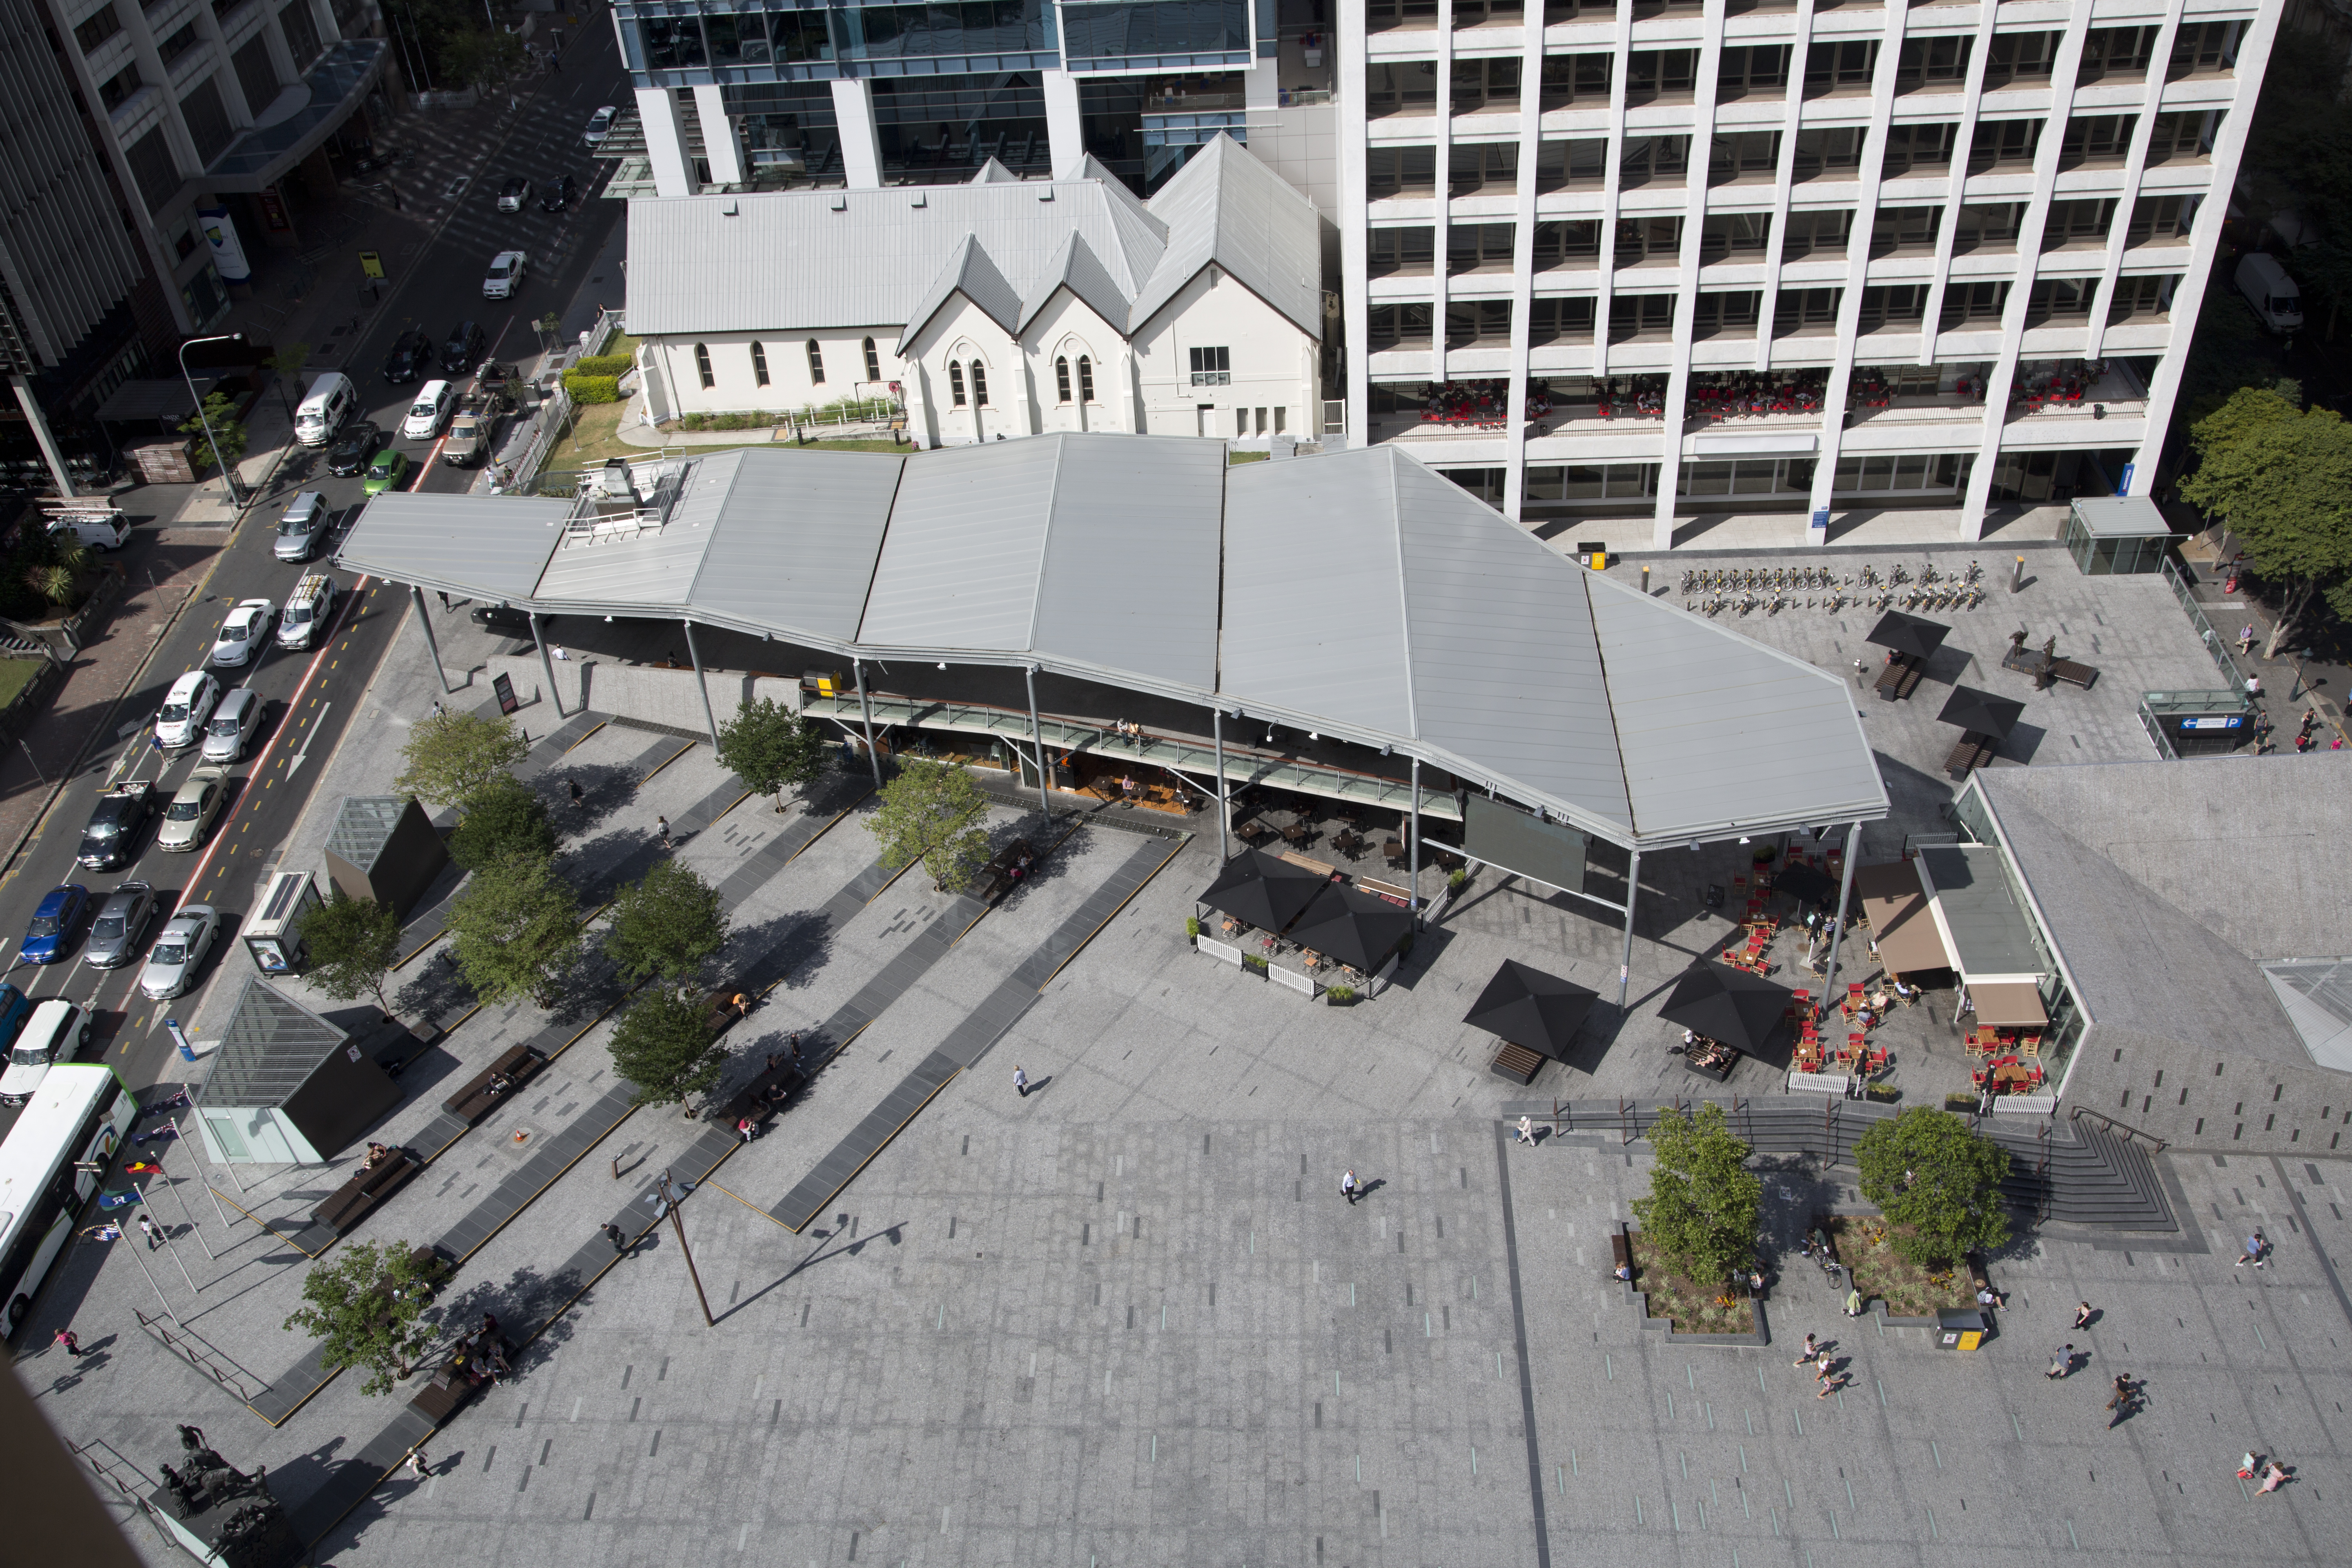 This is an image of the local heritage place known as King George Square from above